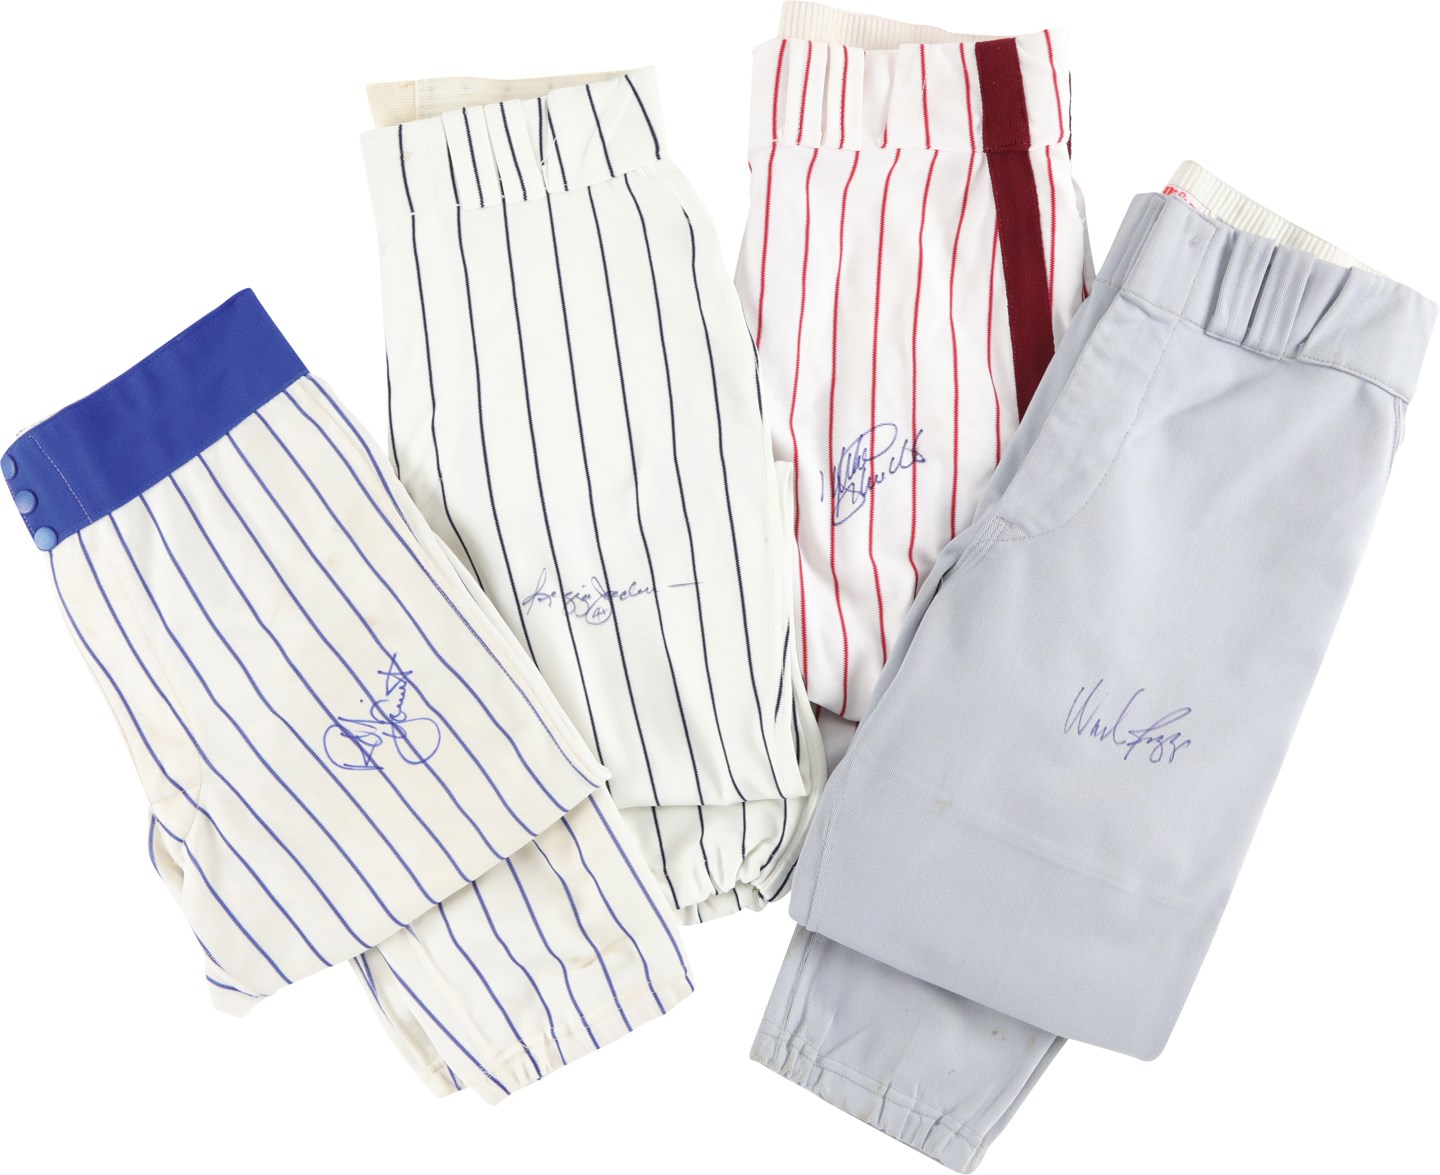 - 1978-1988 HOFers Signed Game Used Pants - Yount, Boggs, Schmidt, Jackson (4)